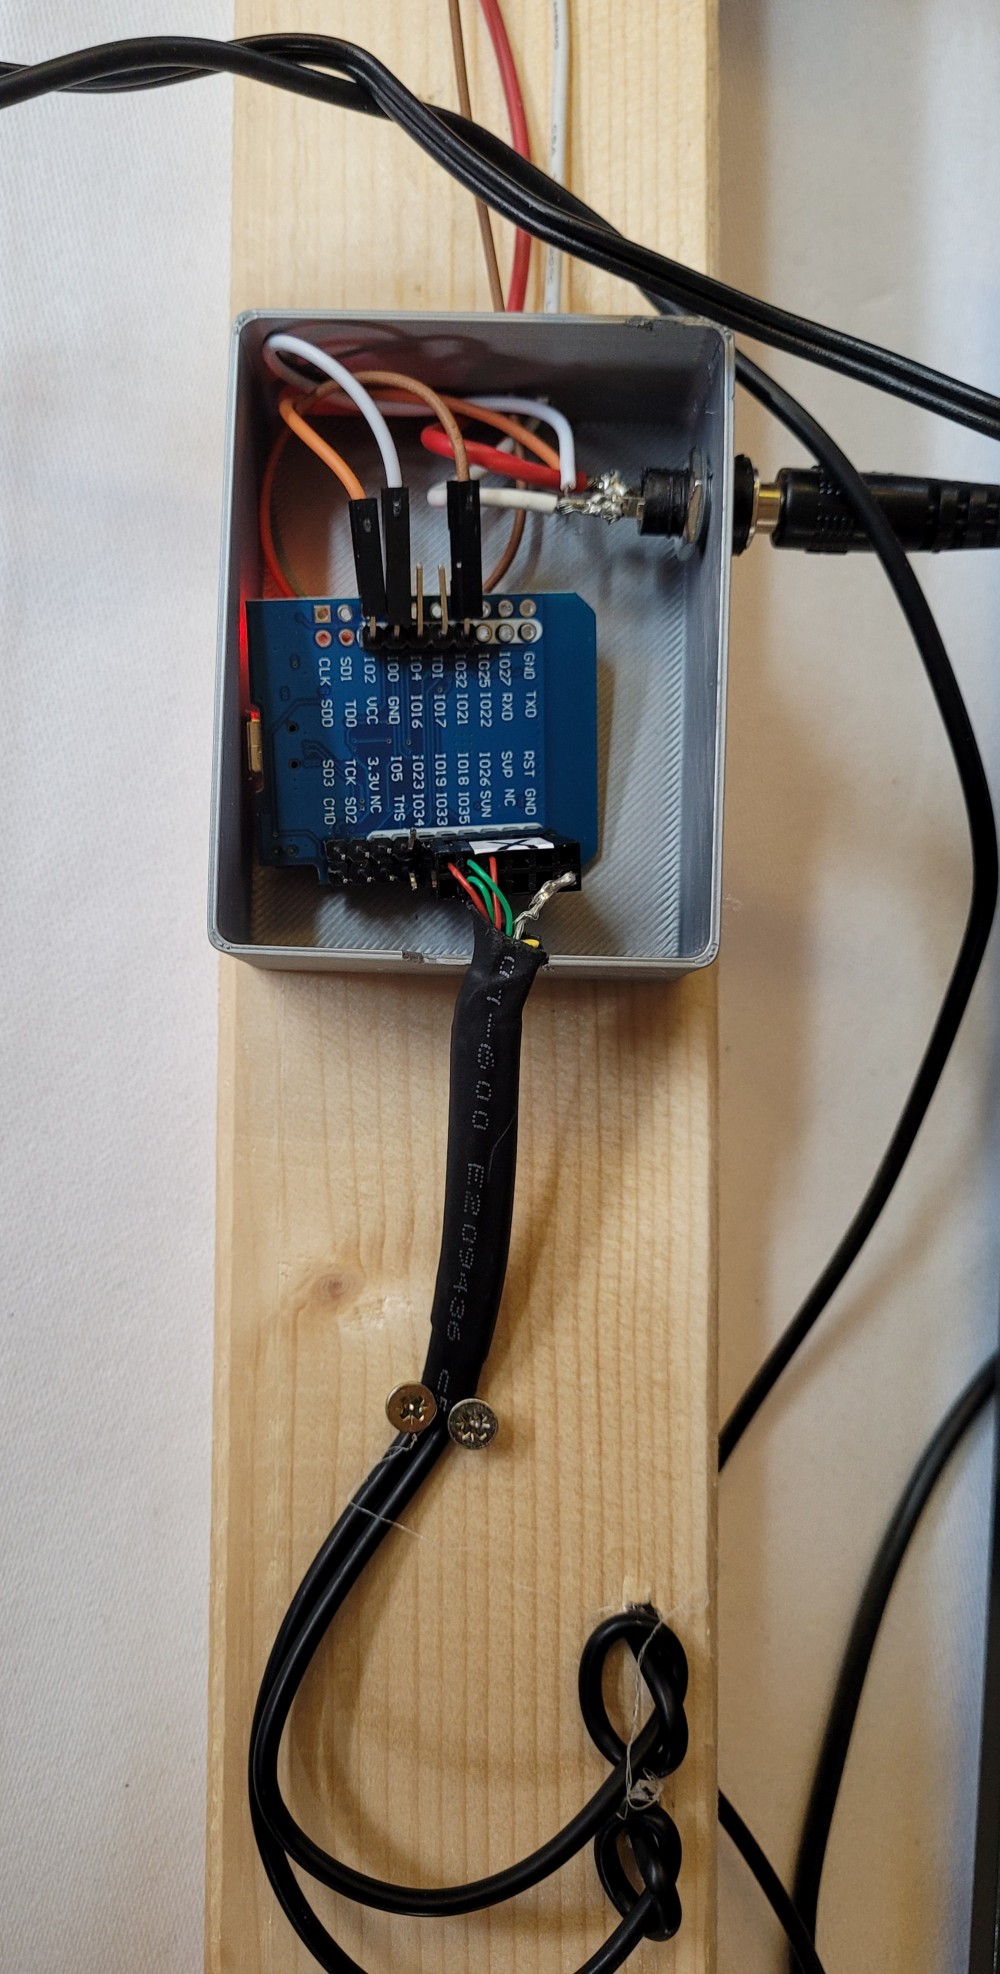 The ESP32 of that shape with Pins connected